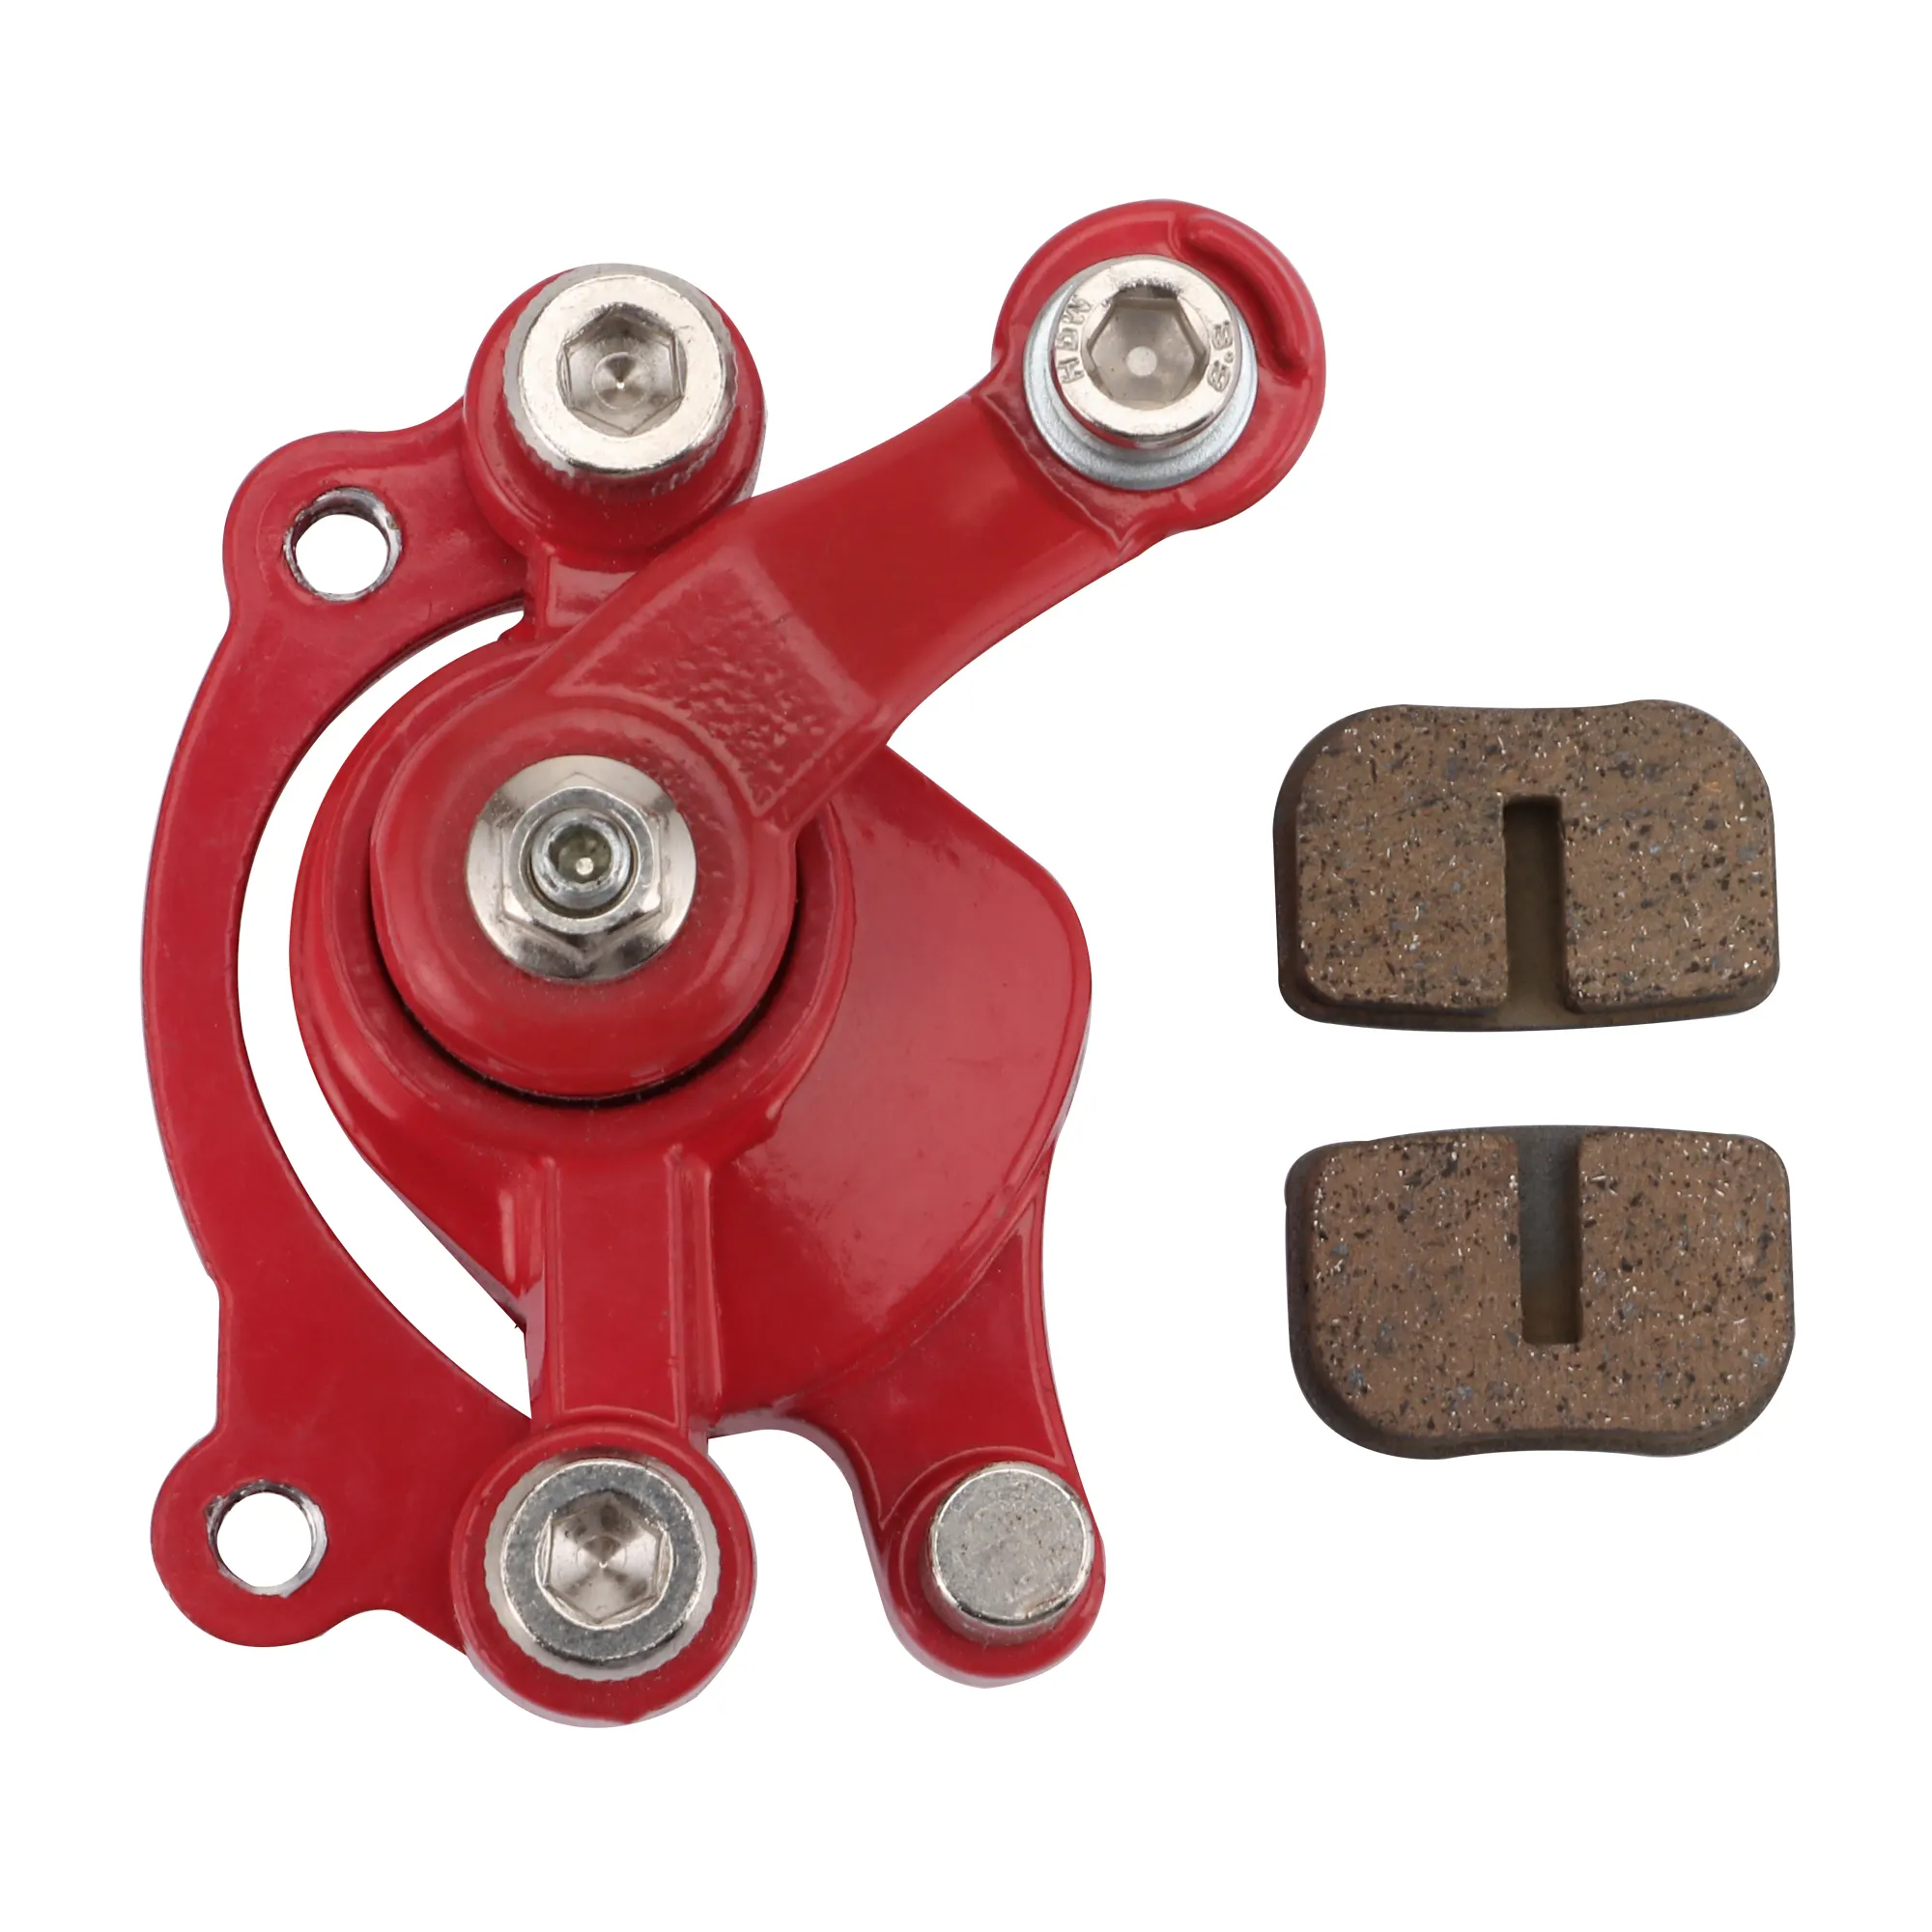 GOOFIT Red Rear Disc Brake Caliper with Brake Pads Replacement for 2 Stroke Dirt Bike Quad Moto Scooter Electric Two-Wheeler